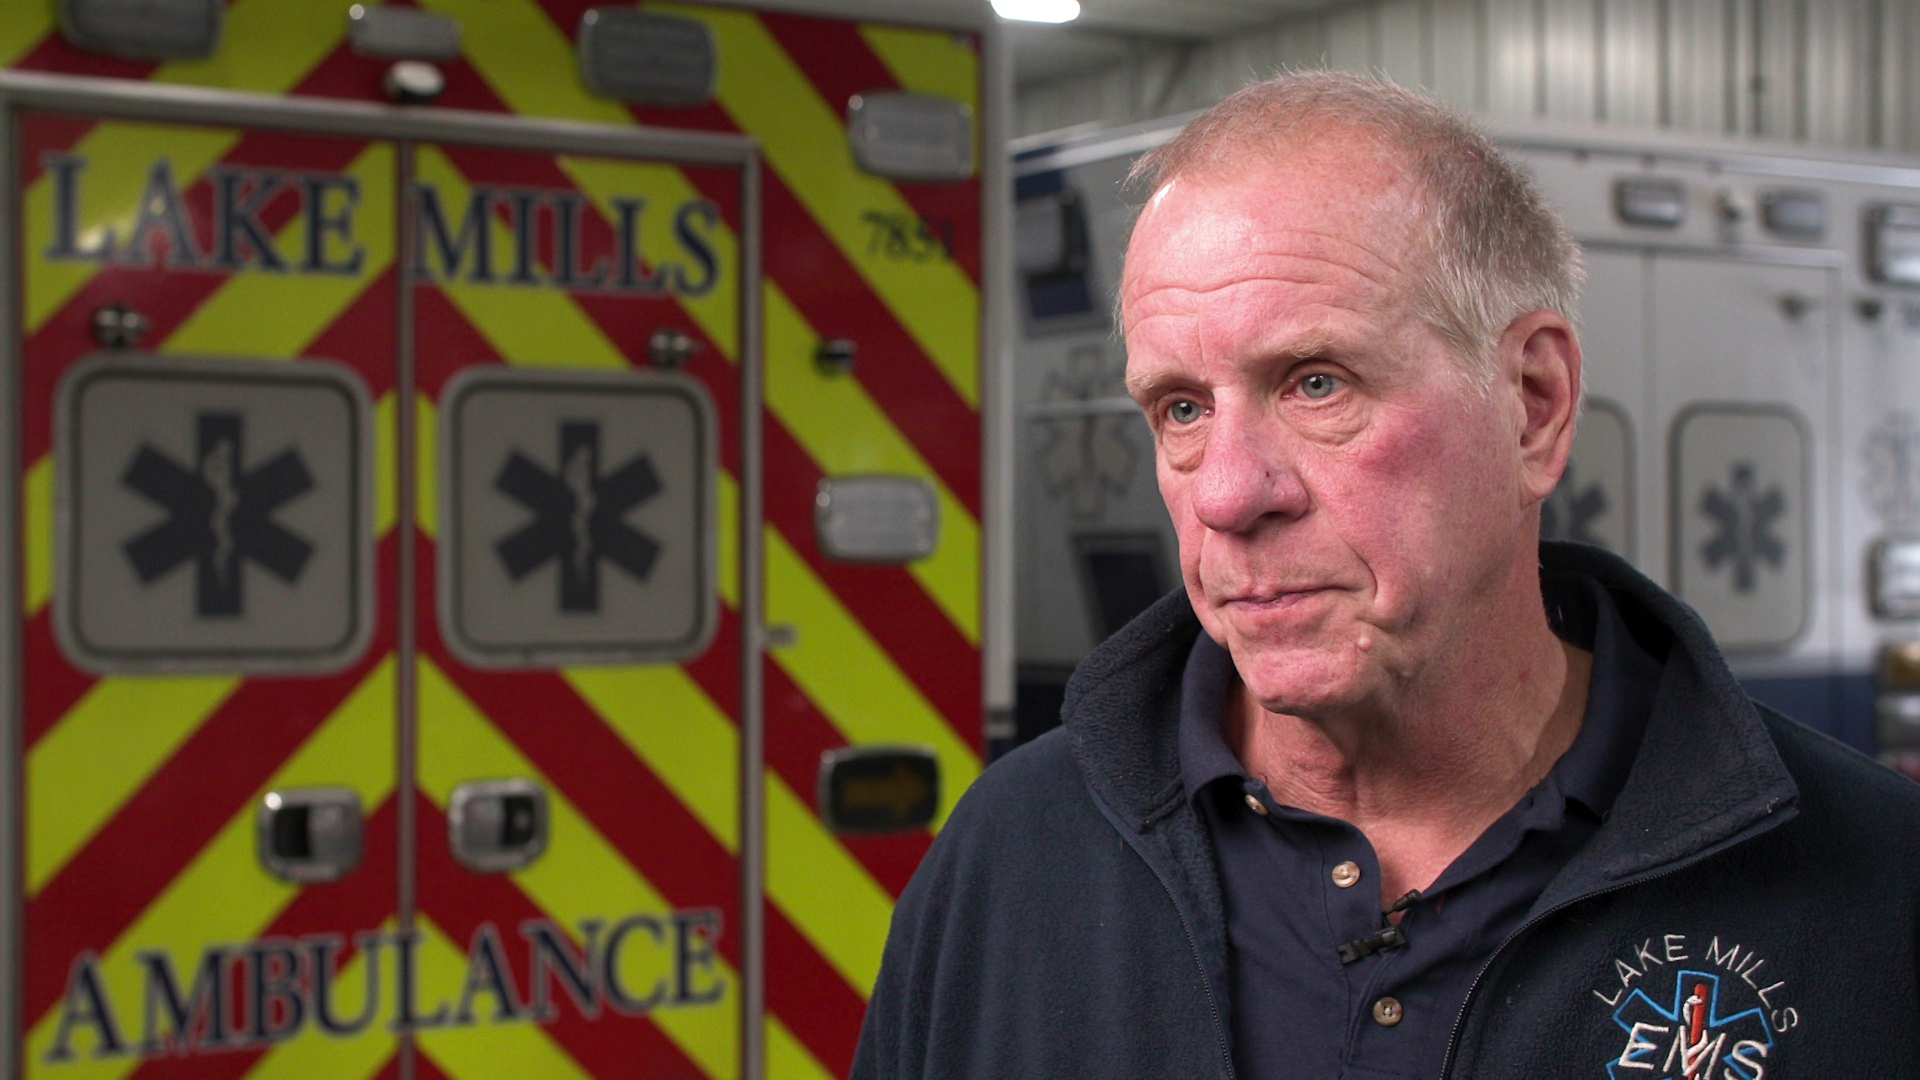 A still image from a video shows Jim Colegrove sitting in a garage with two ambulances in the background.